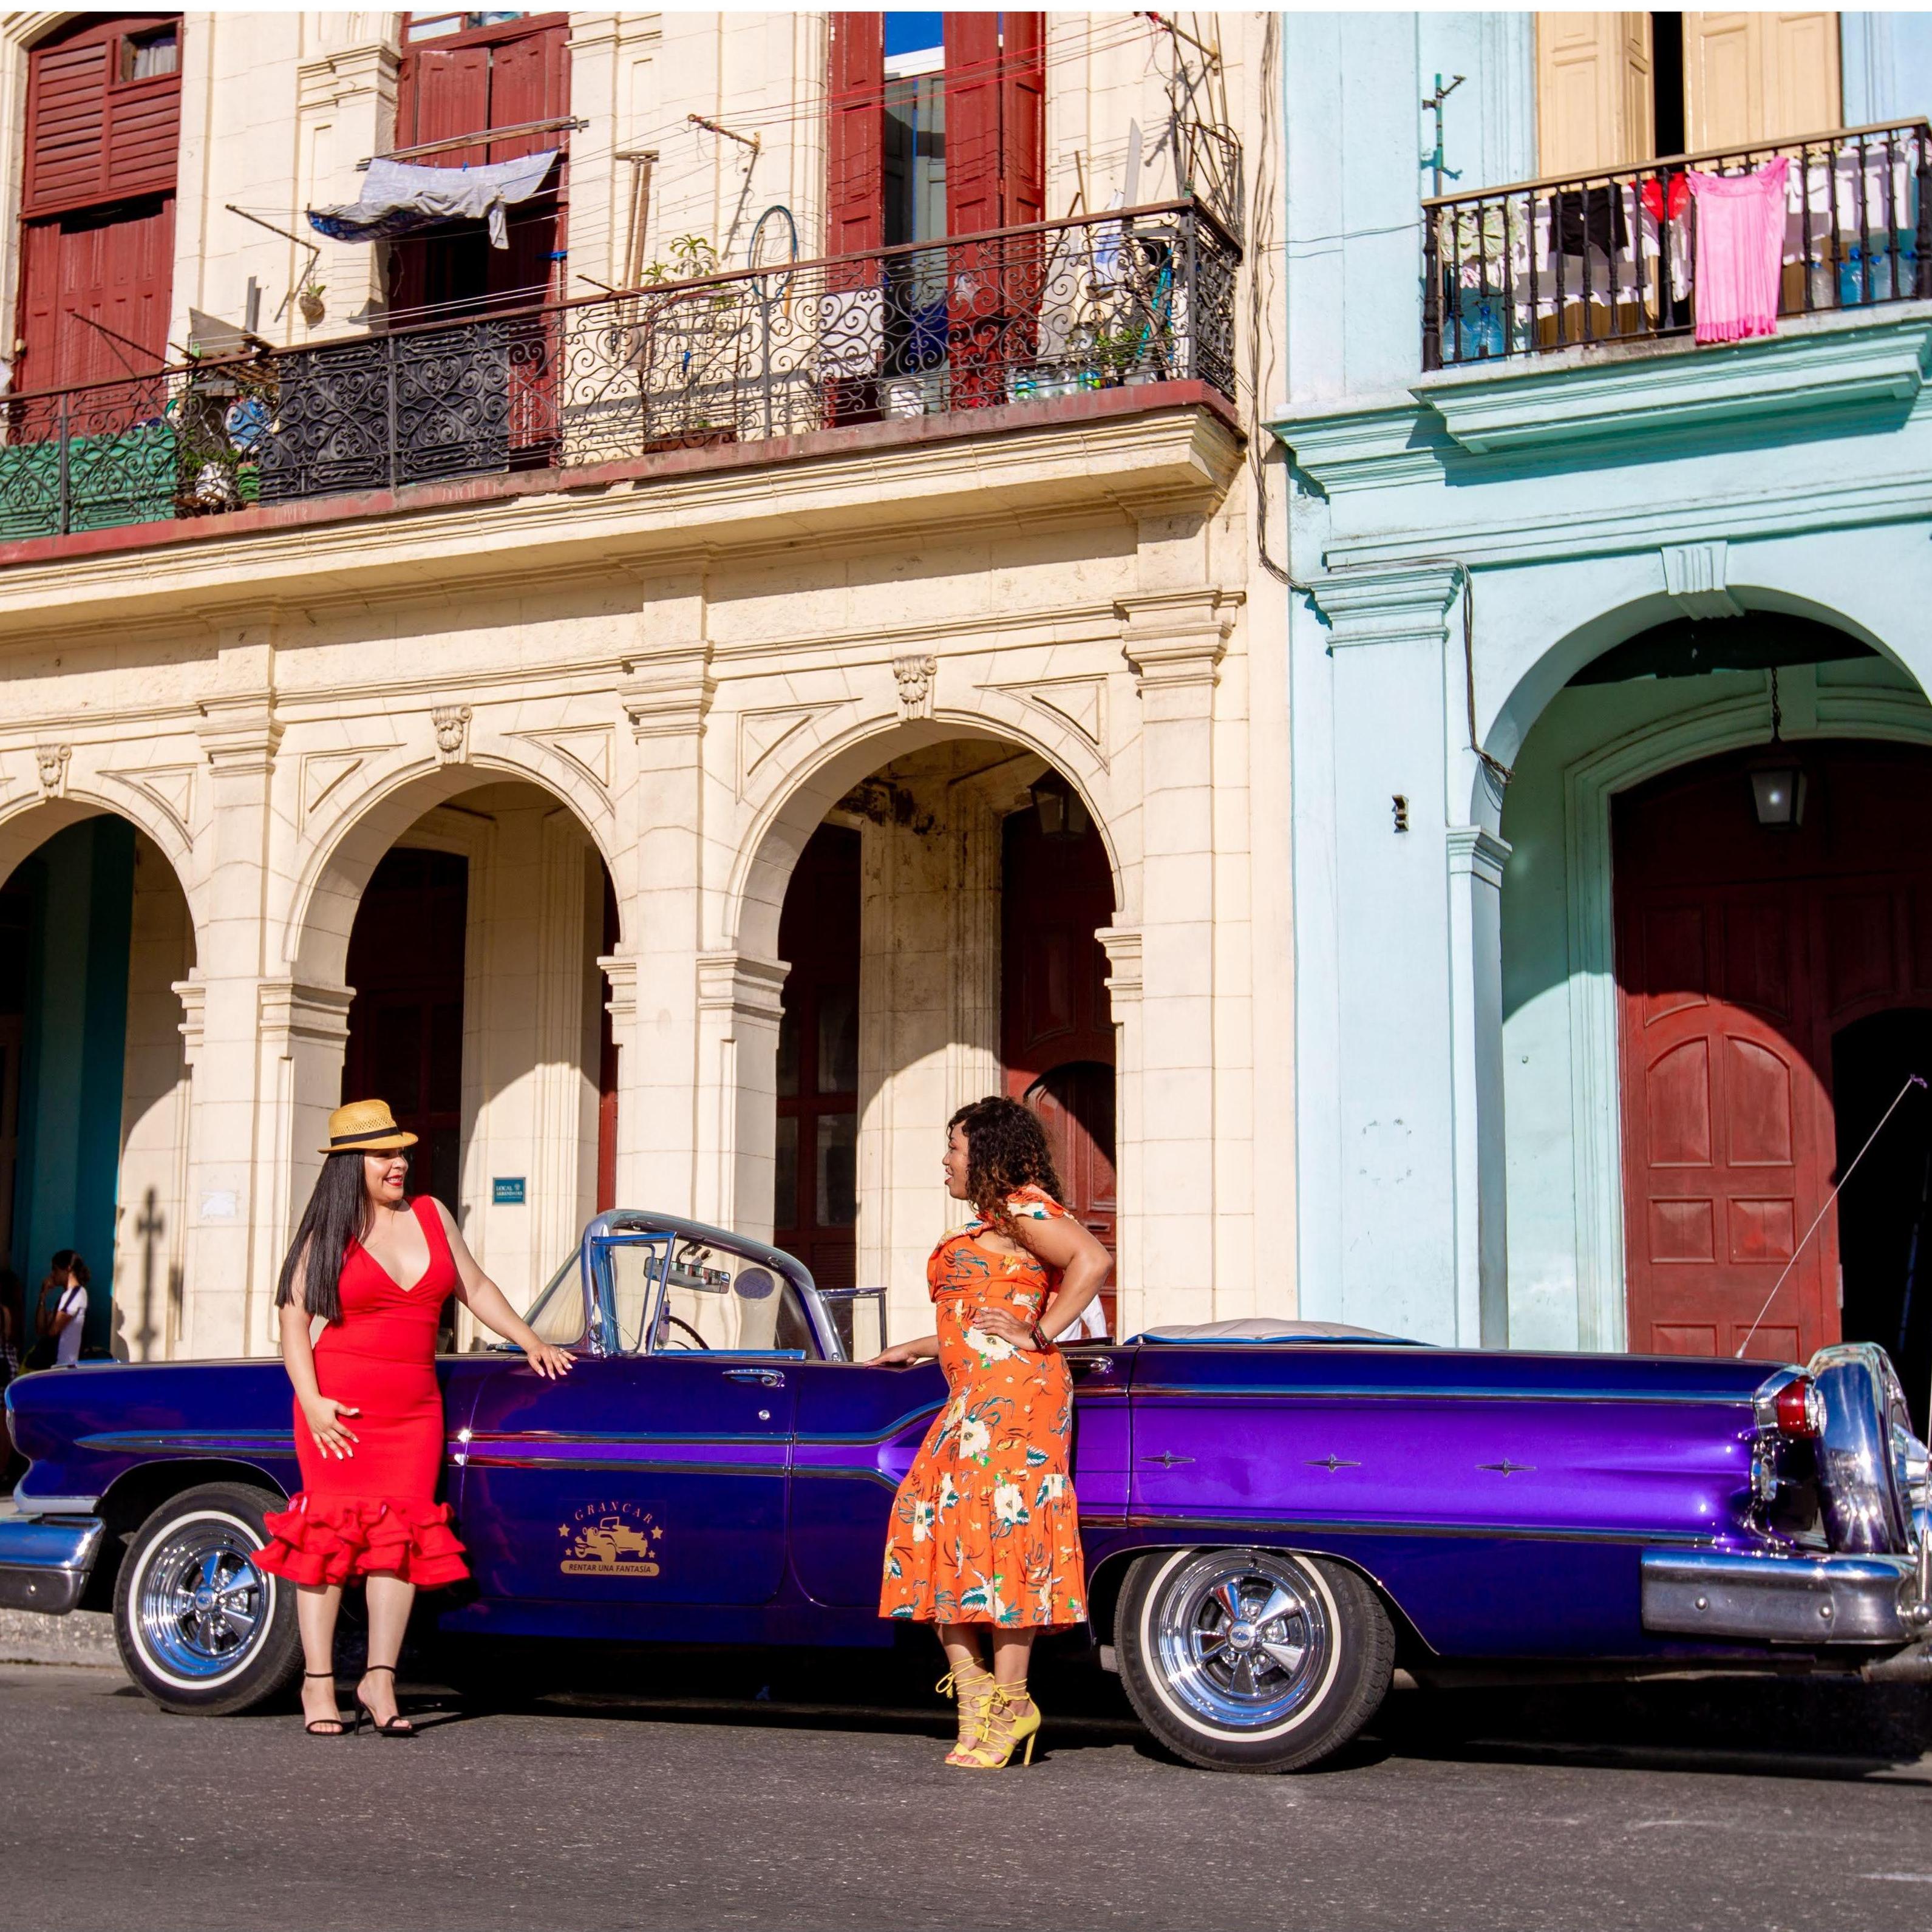 Our first international trip was to Cuba!